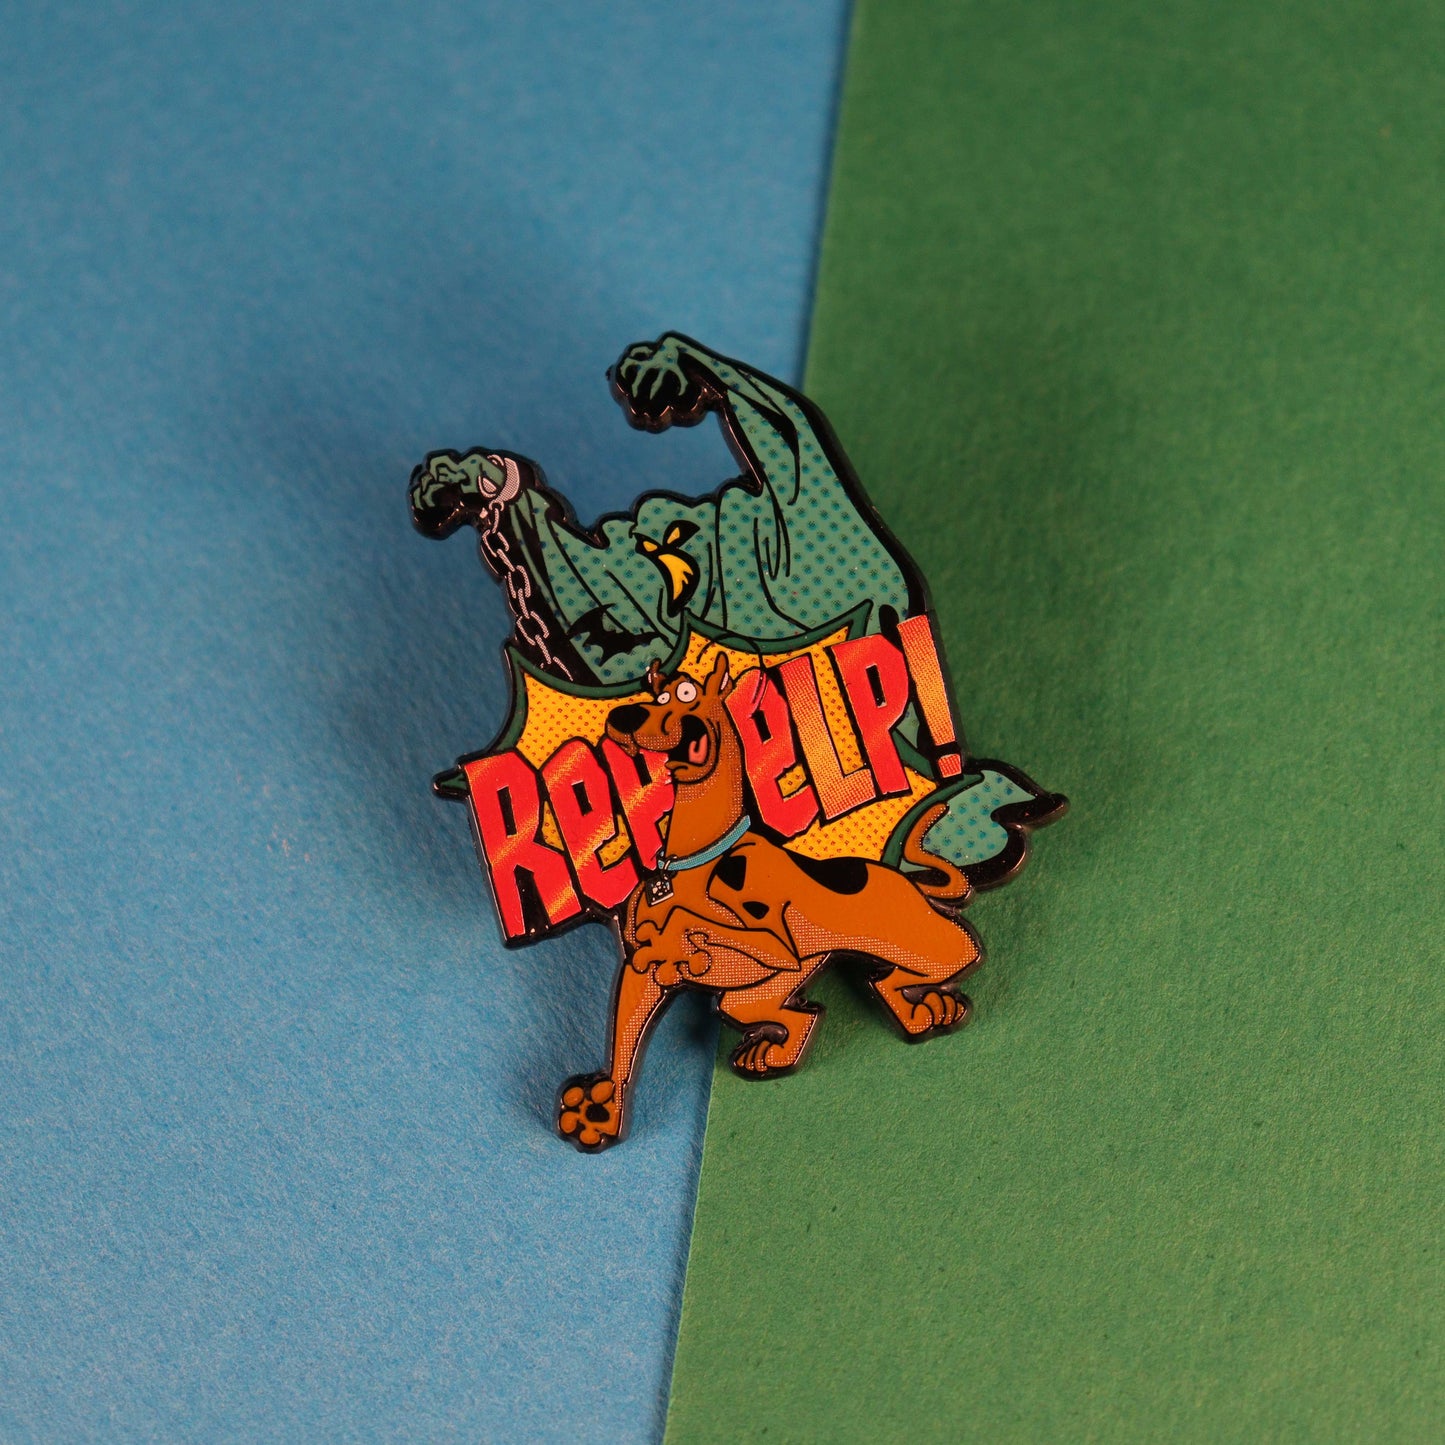 Scooby Doo Limited Edition Pin Badge